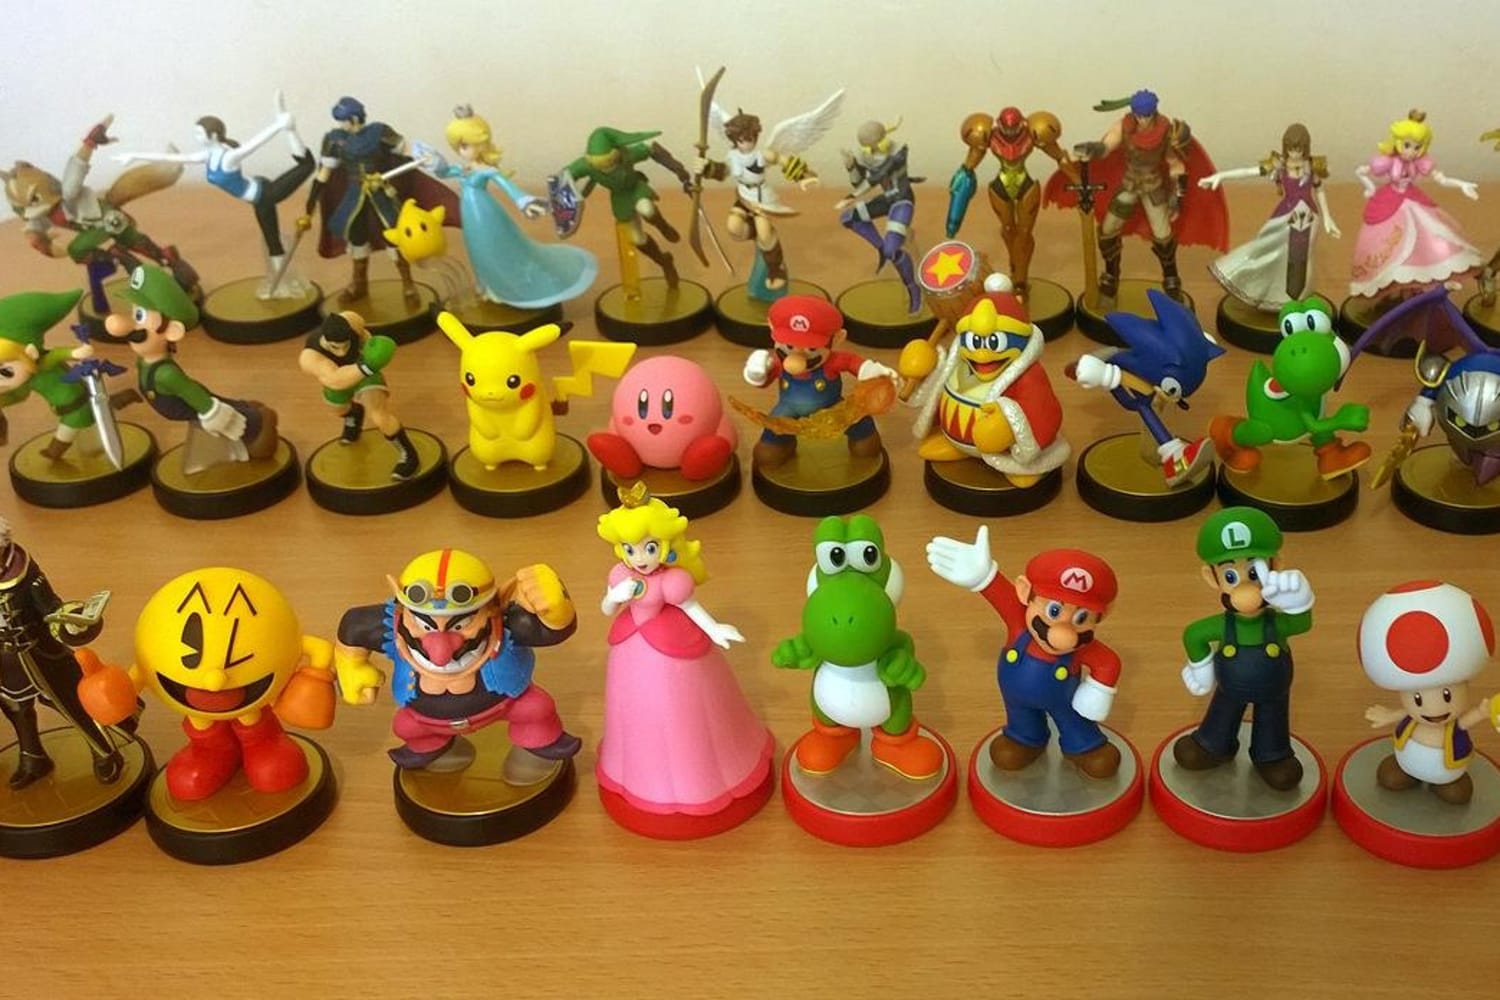 chris-scullion-s-complete-amiibo-collection